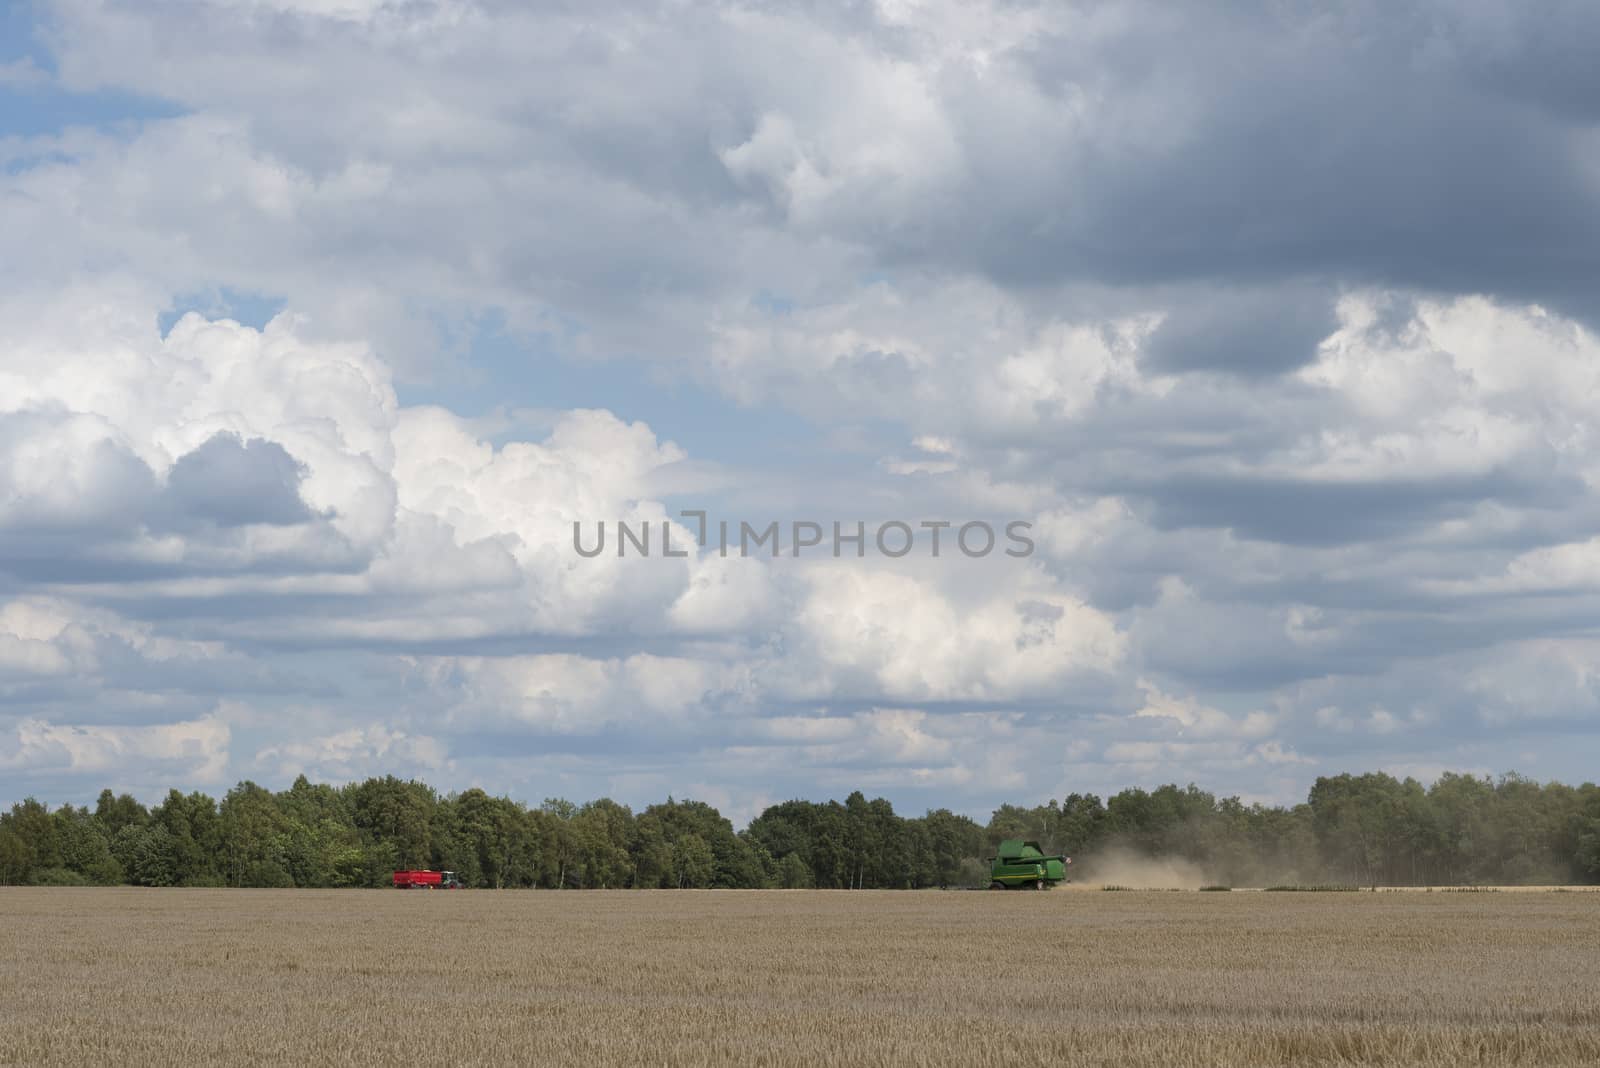 Combine on a field with cloudy skies by Tofotografie